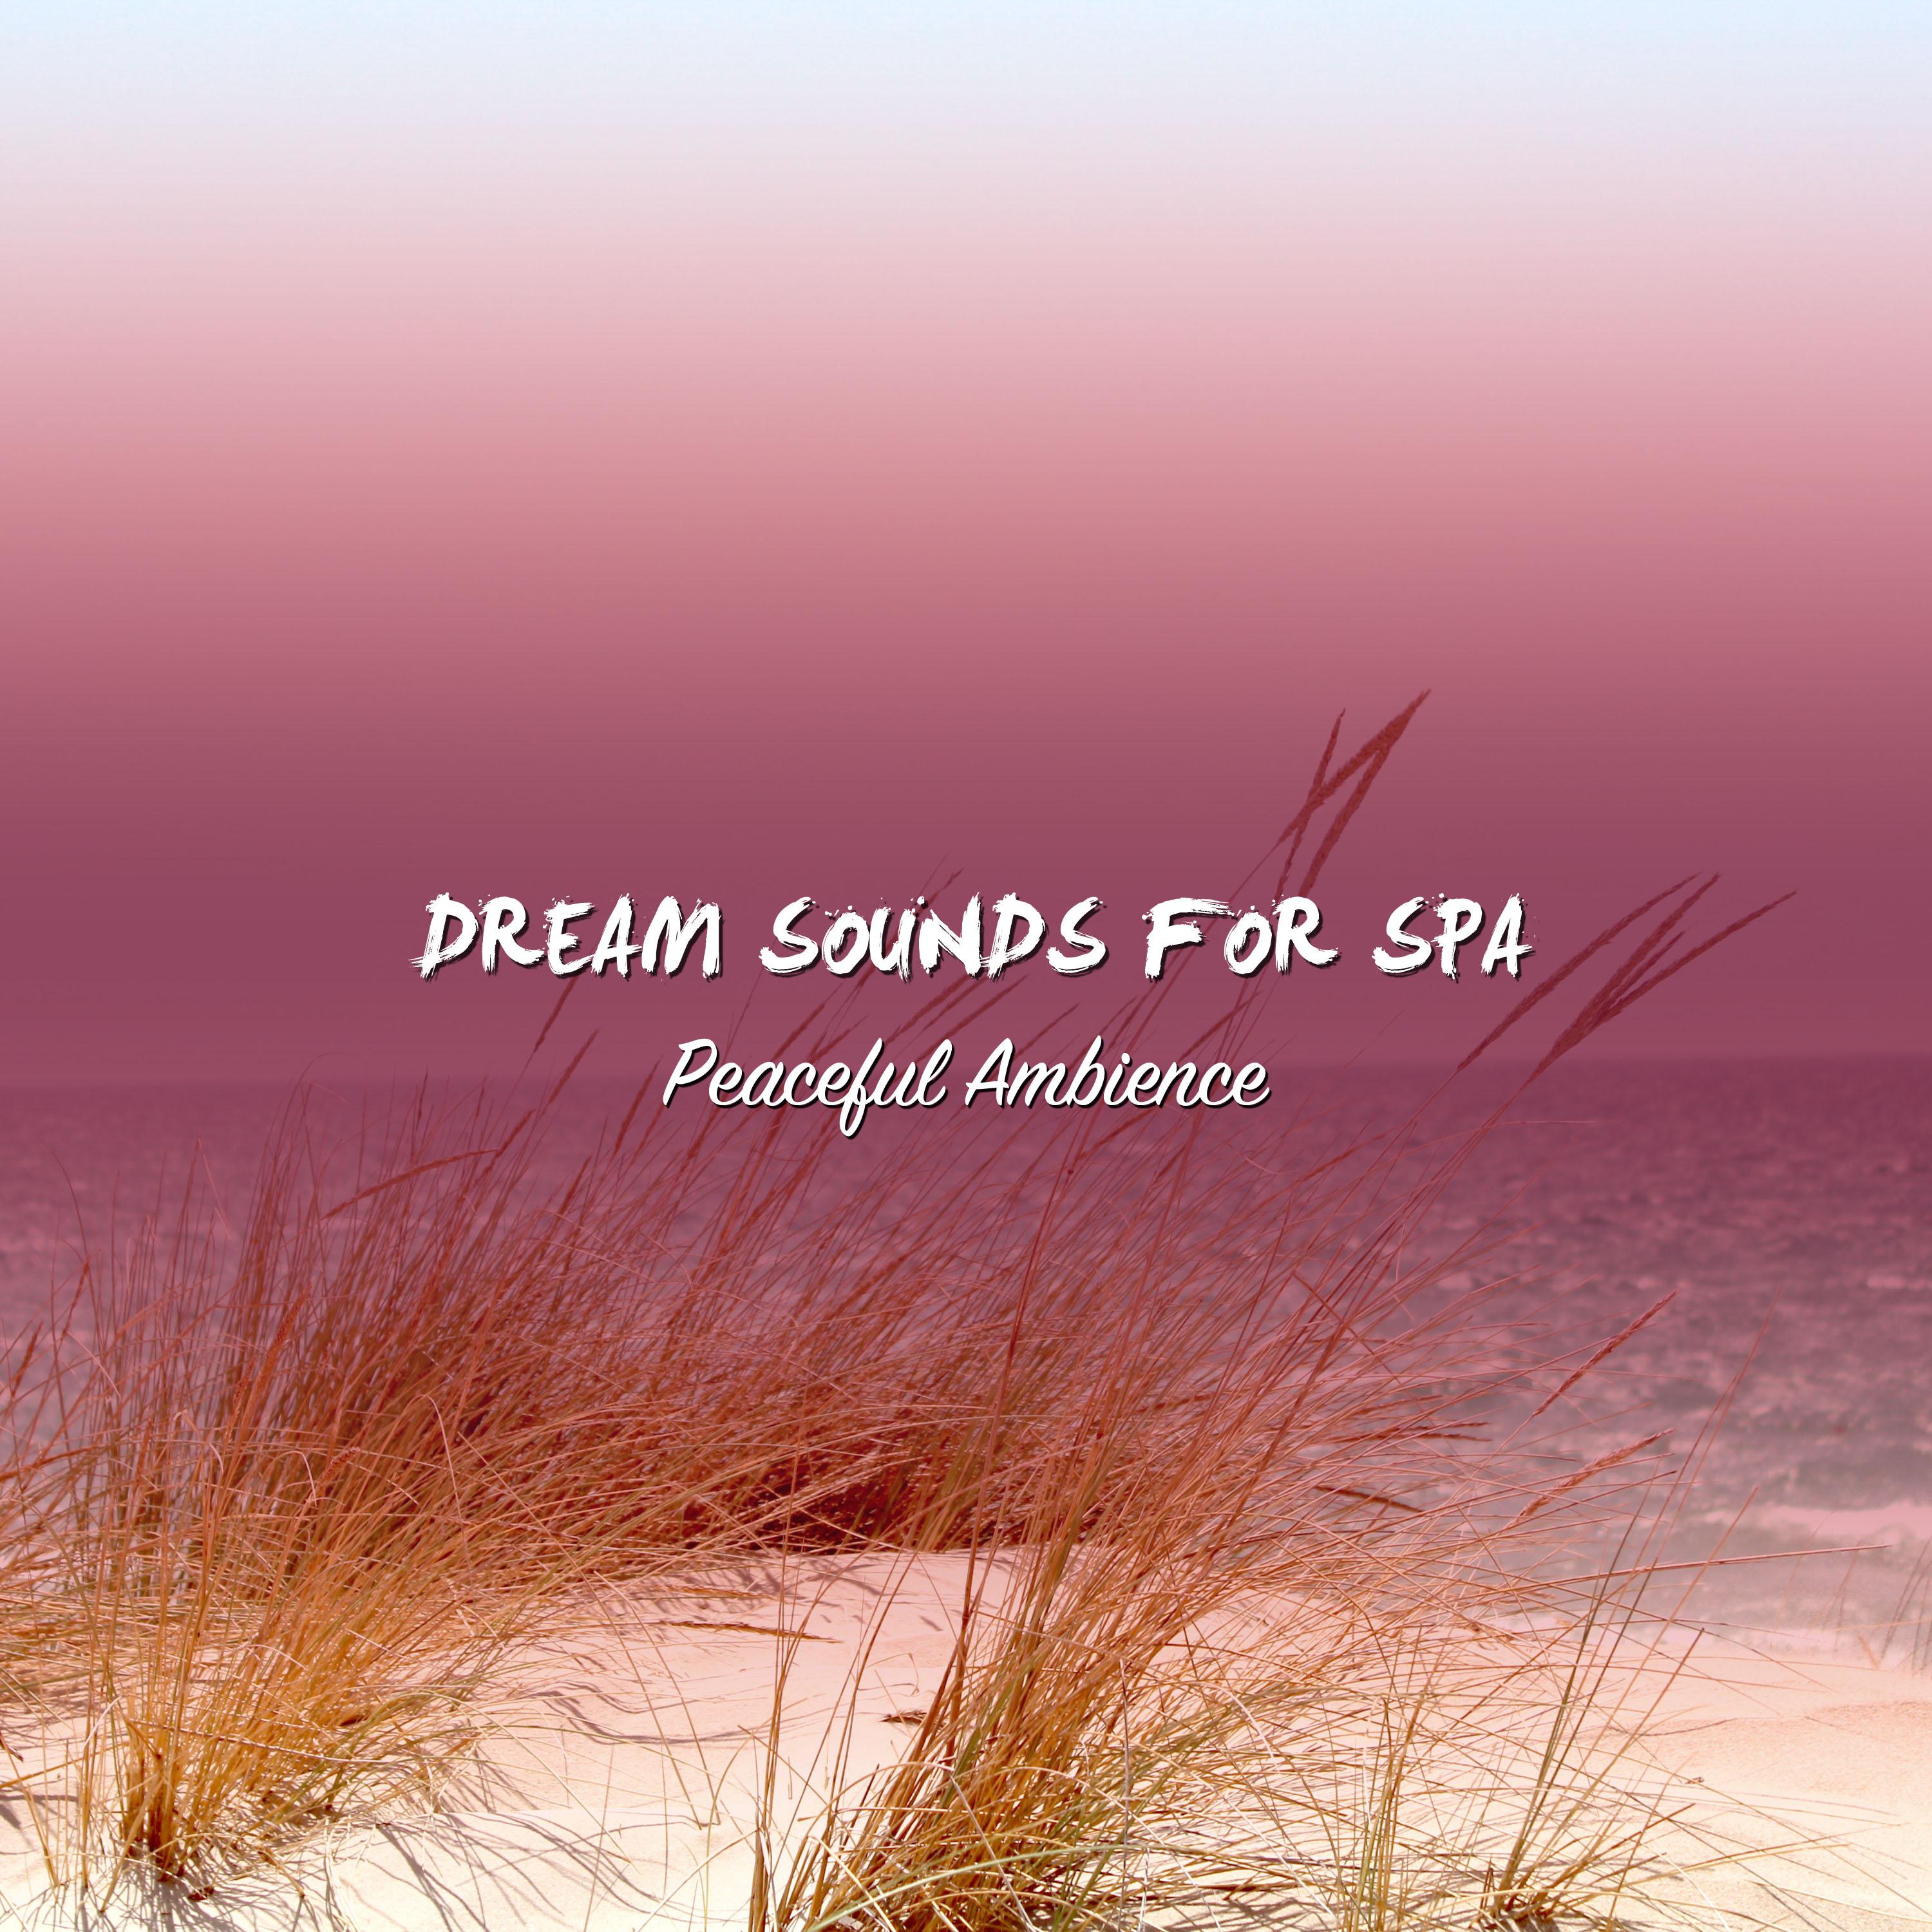 25 Dream Sounds for Spa - Peaceful Ambience